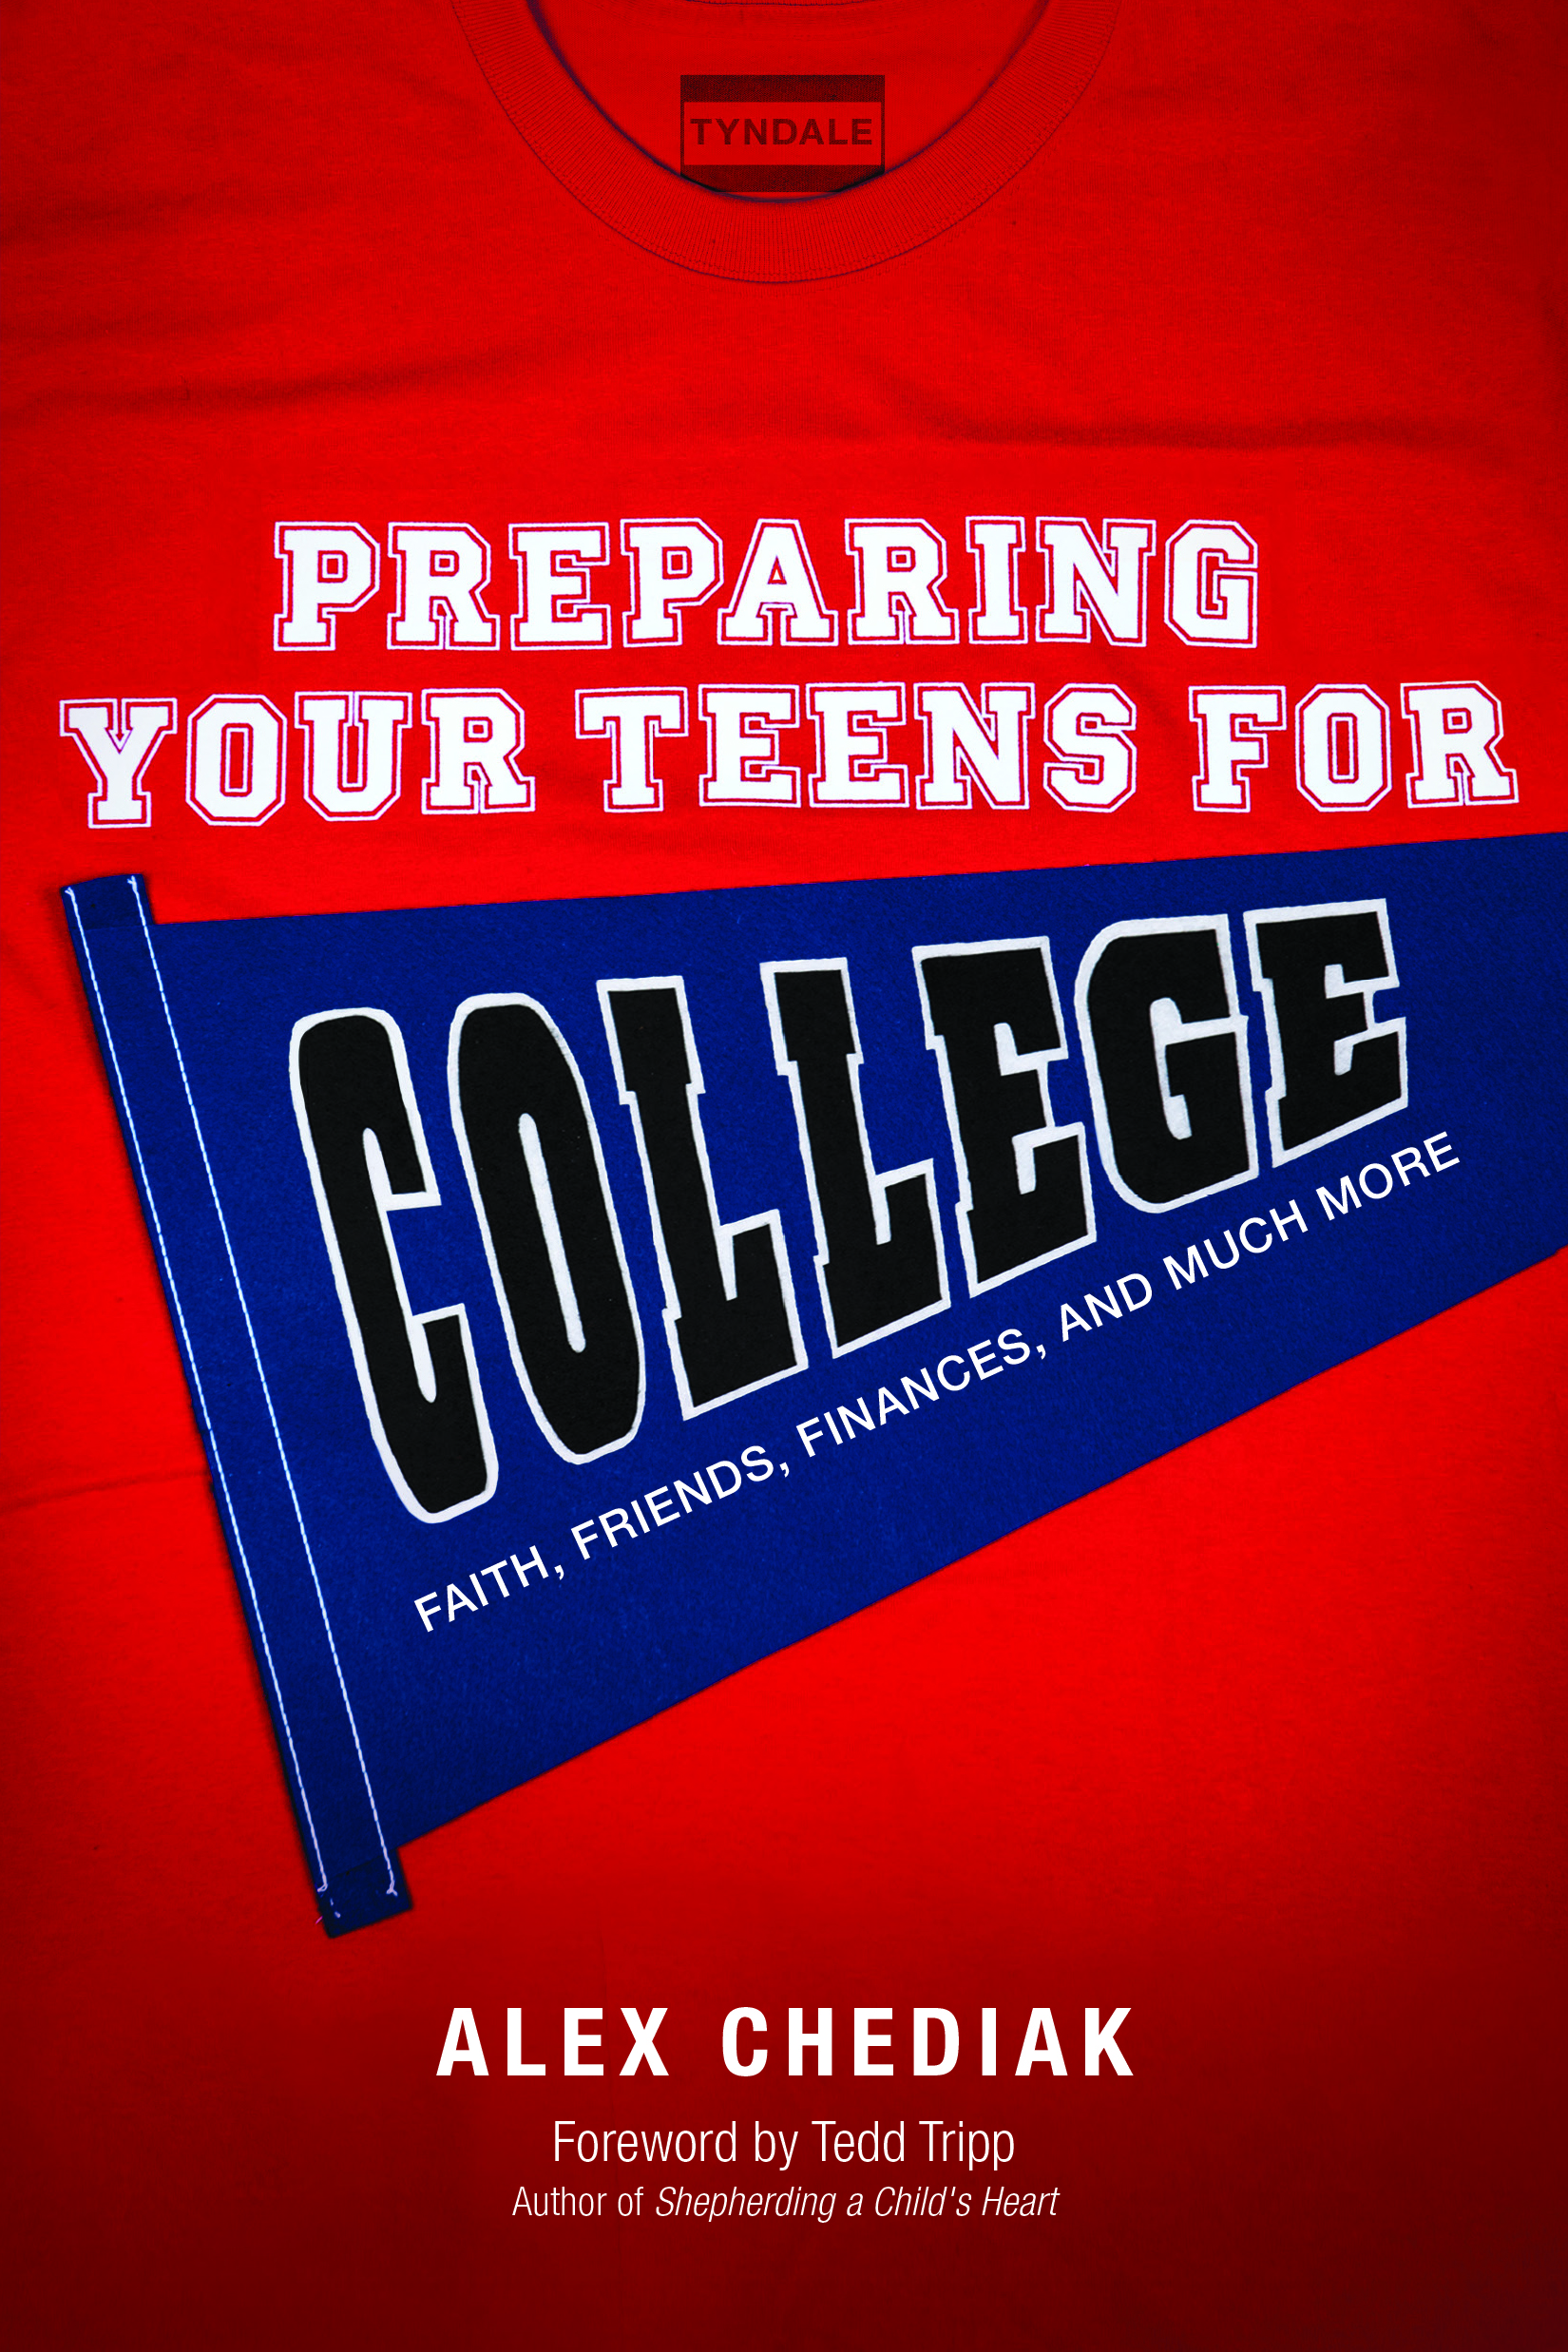 Leadership Journal Interview on Preparing Your Teens for College